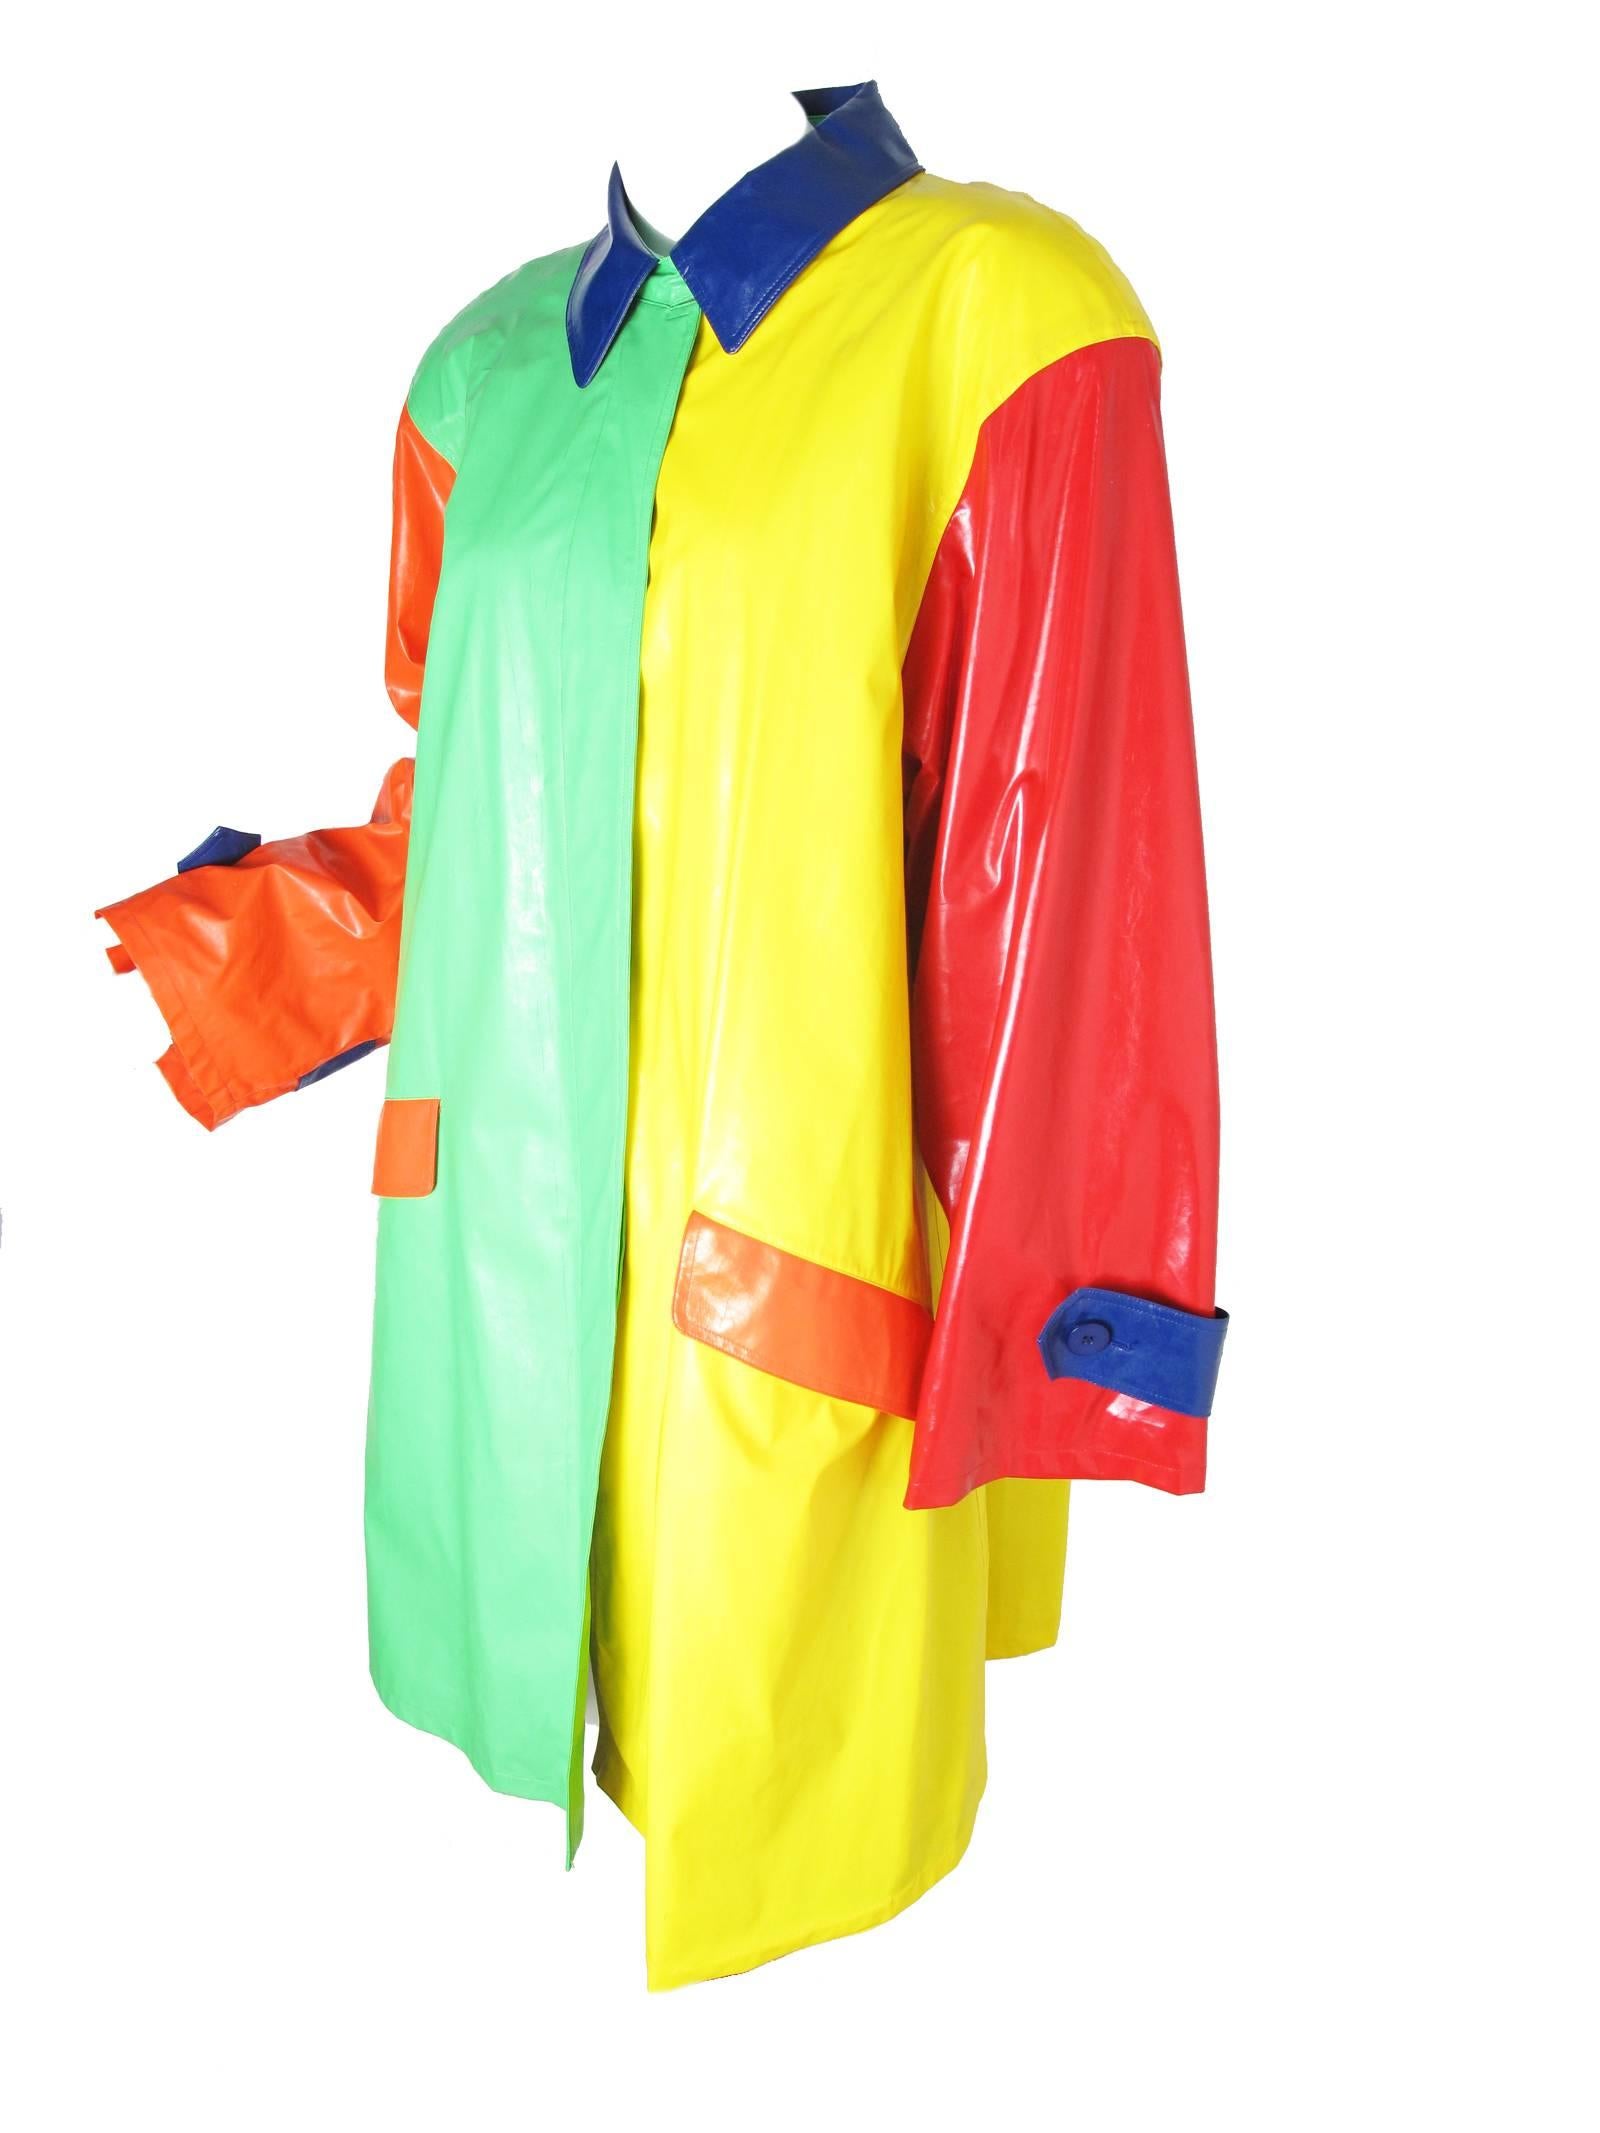 1970s Bill Blass primary colored raincoat.  Condition: AS IS, cracking to vinyl. Size 10

We accept returns for refund, please see our terms.  We offer free ground shipping within the US.  Please let us know if you have any questions.